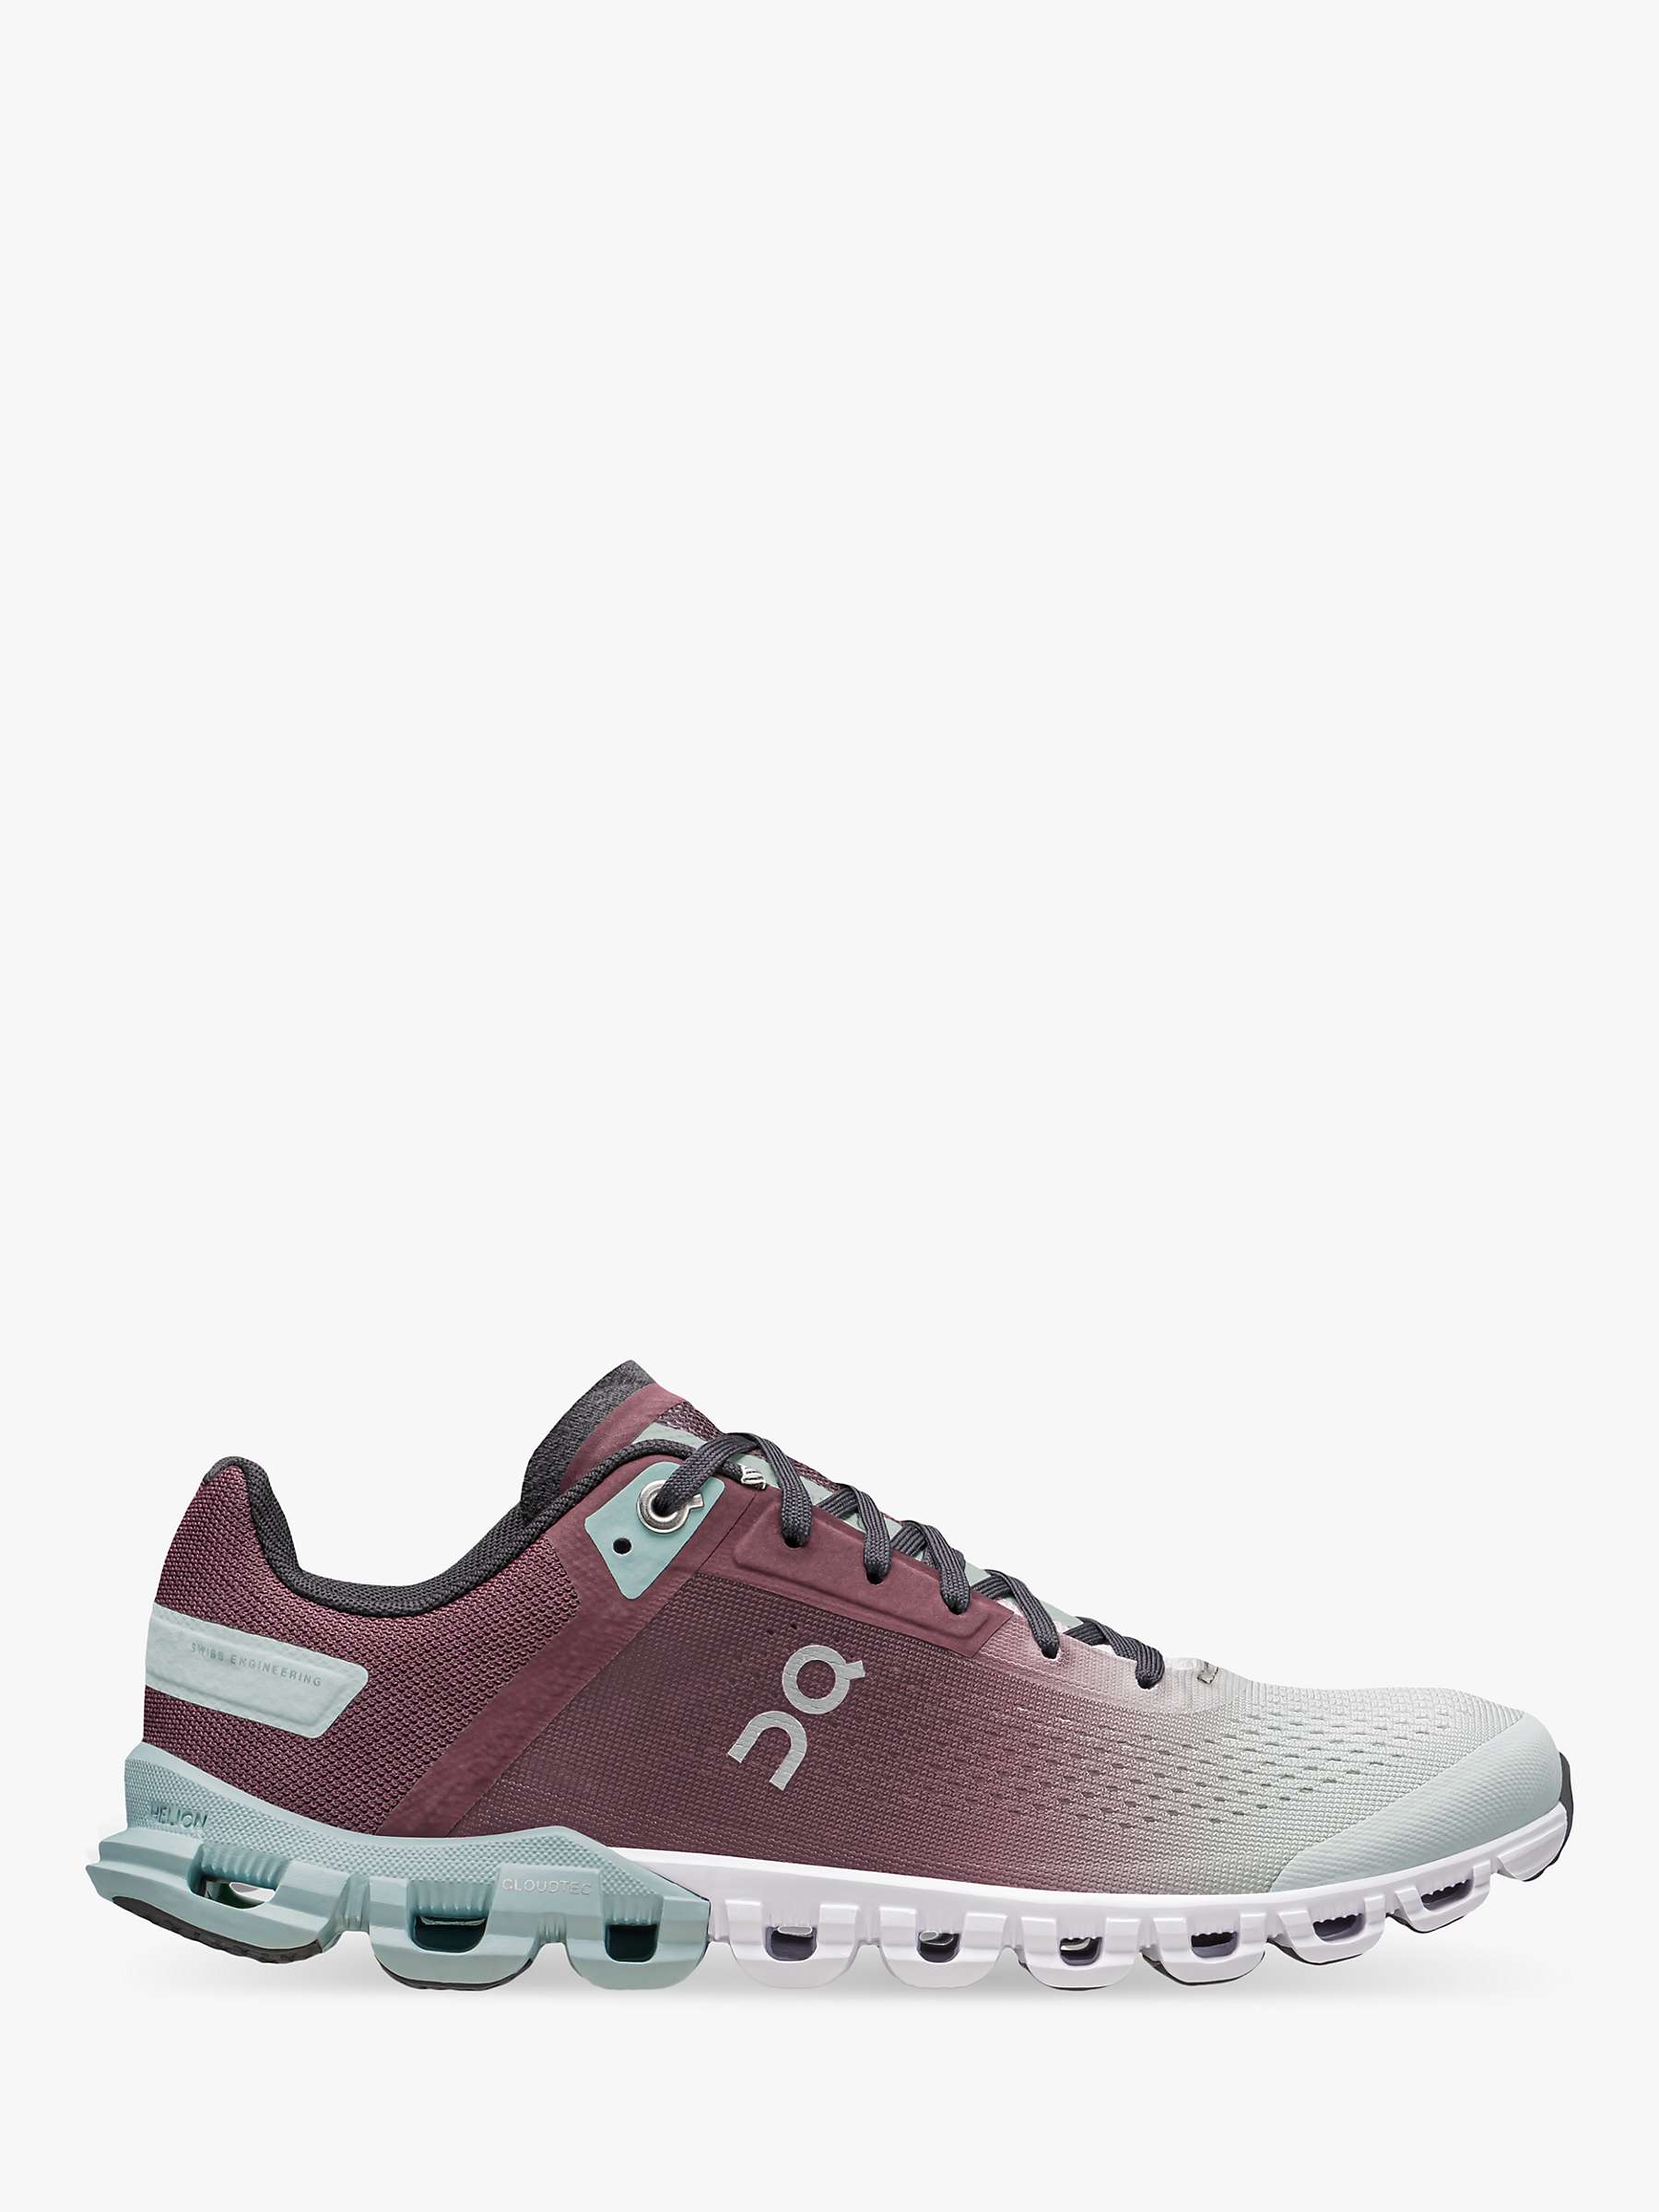 Buy On Cloudflow Women's Running Shoes Online at johnlewis.com